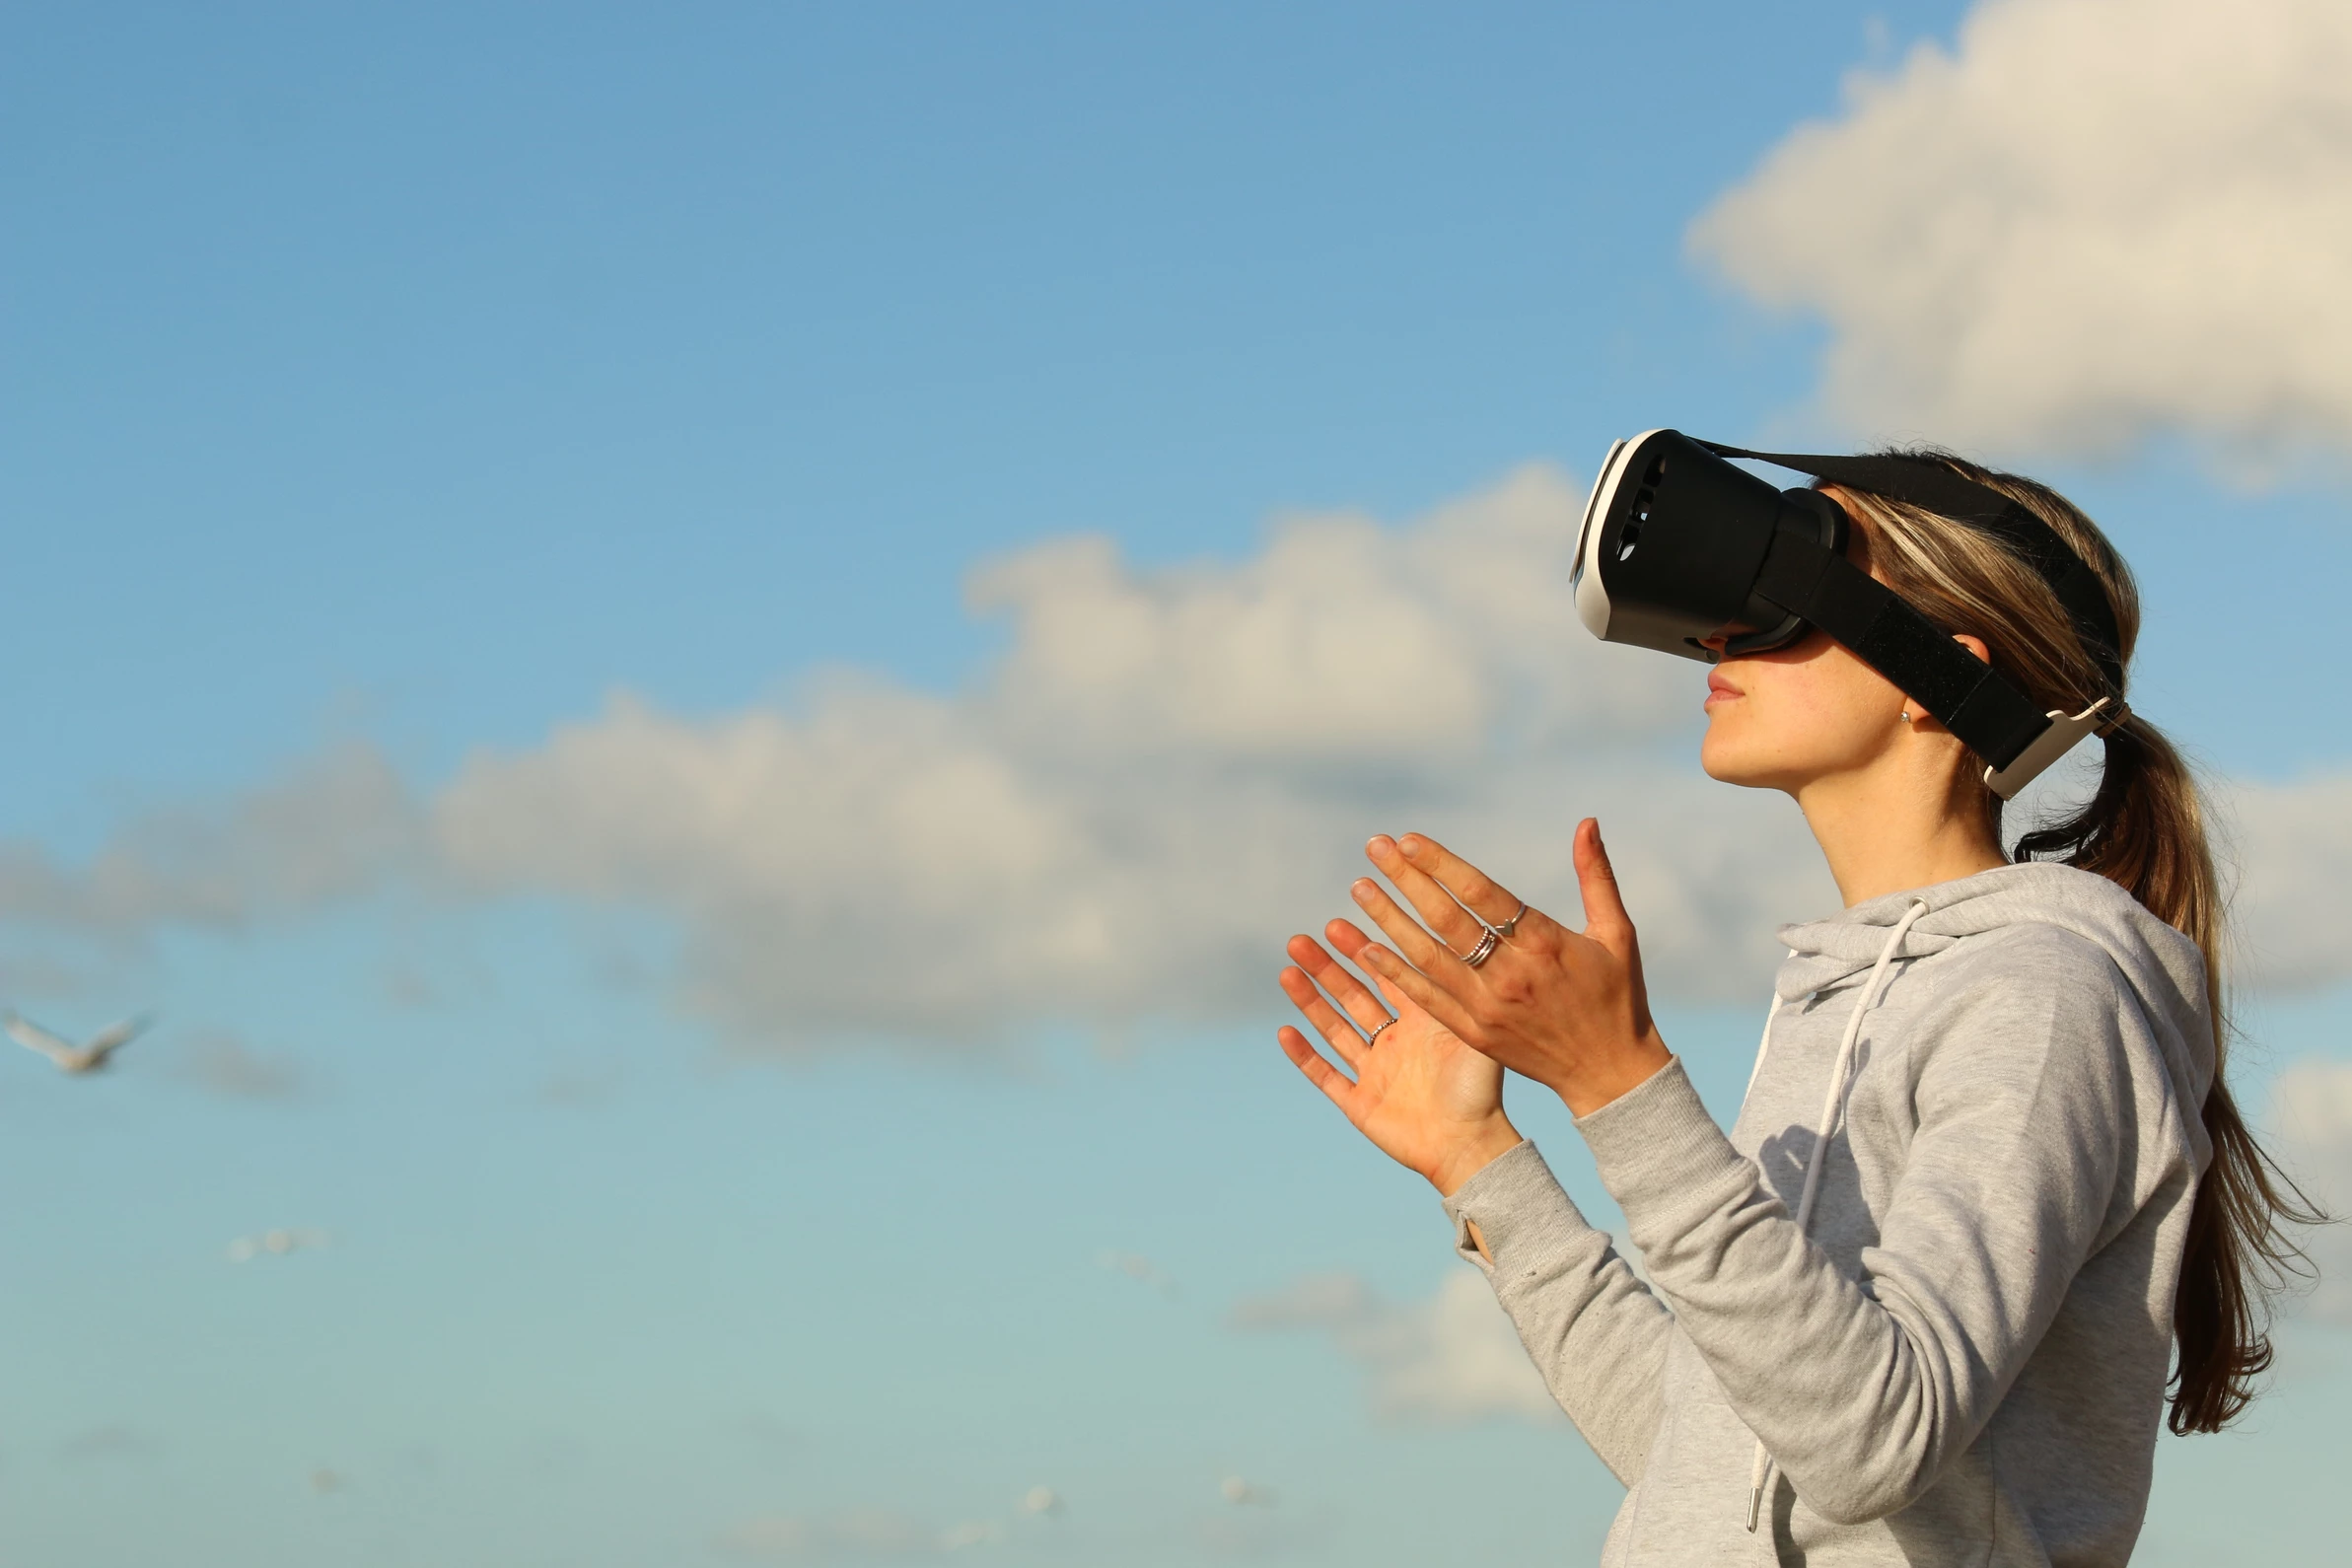 How can virtual reality help in palliative care?